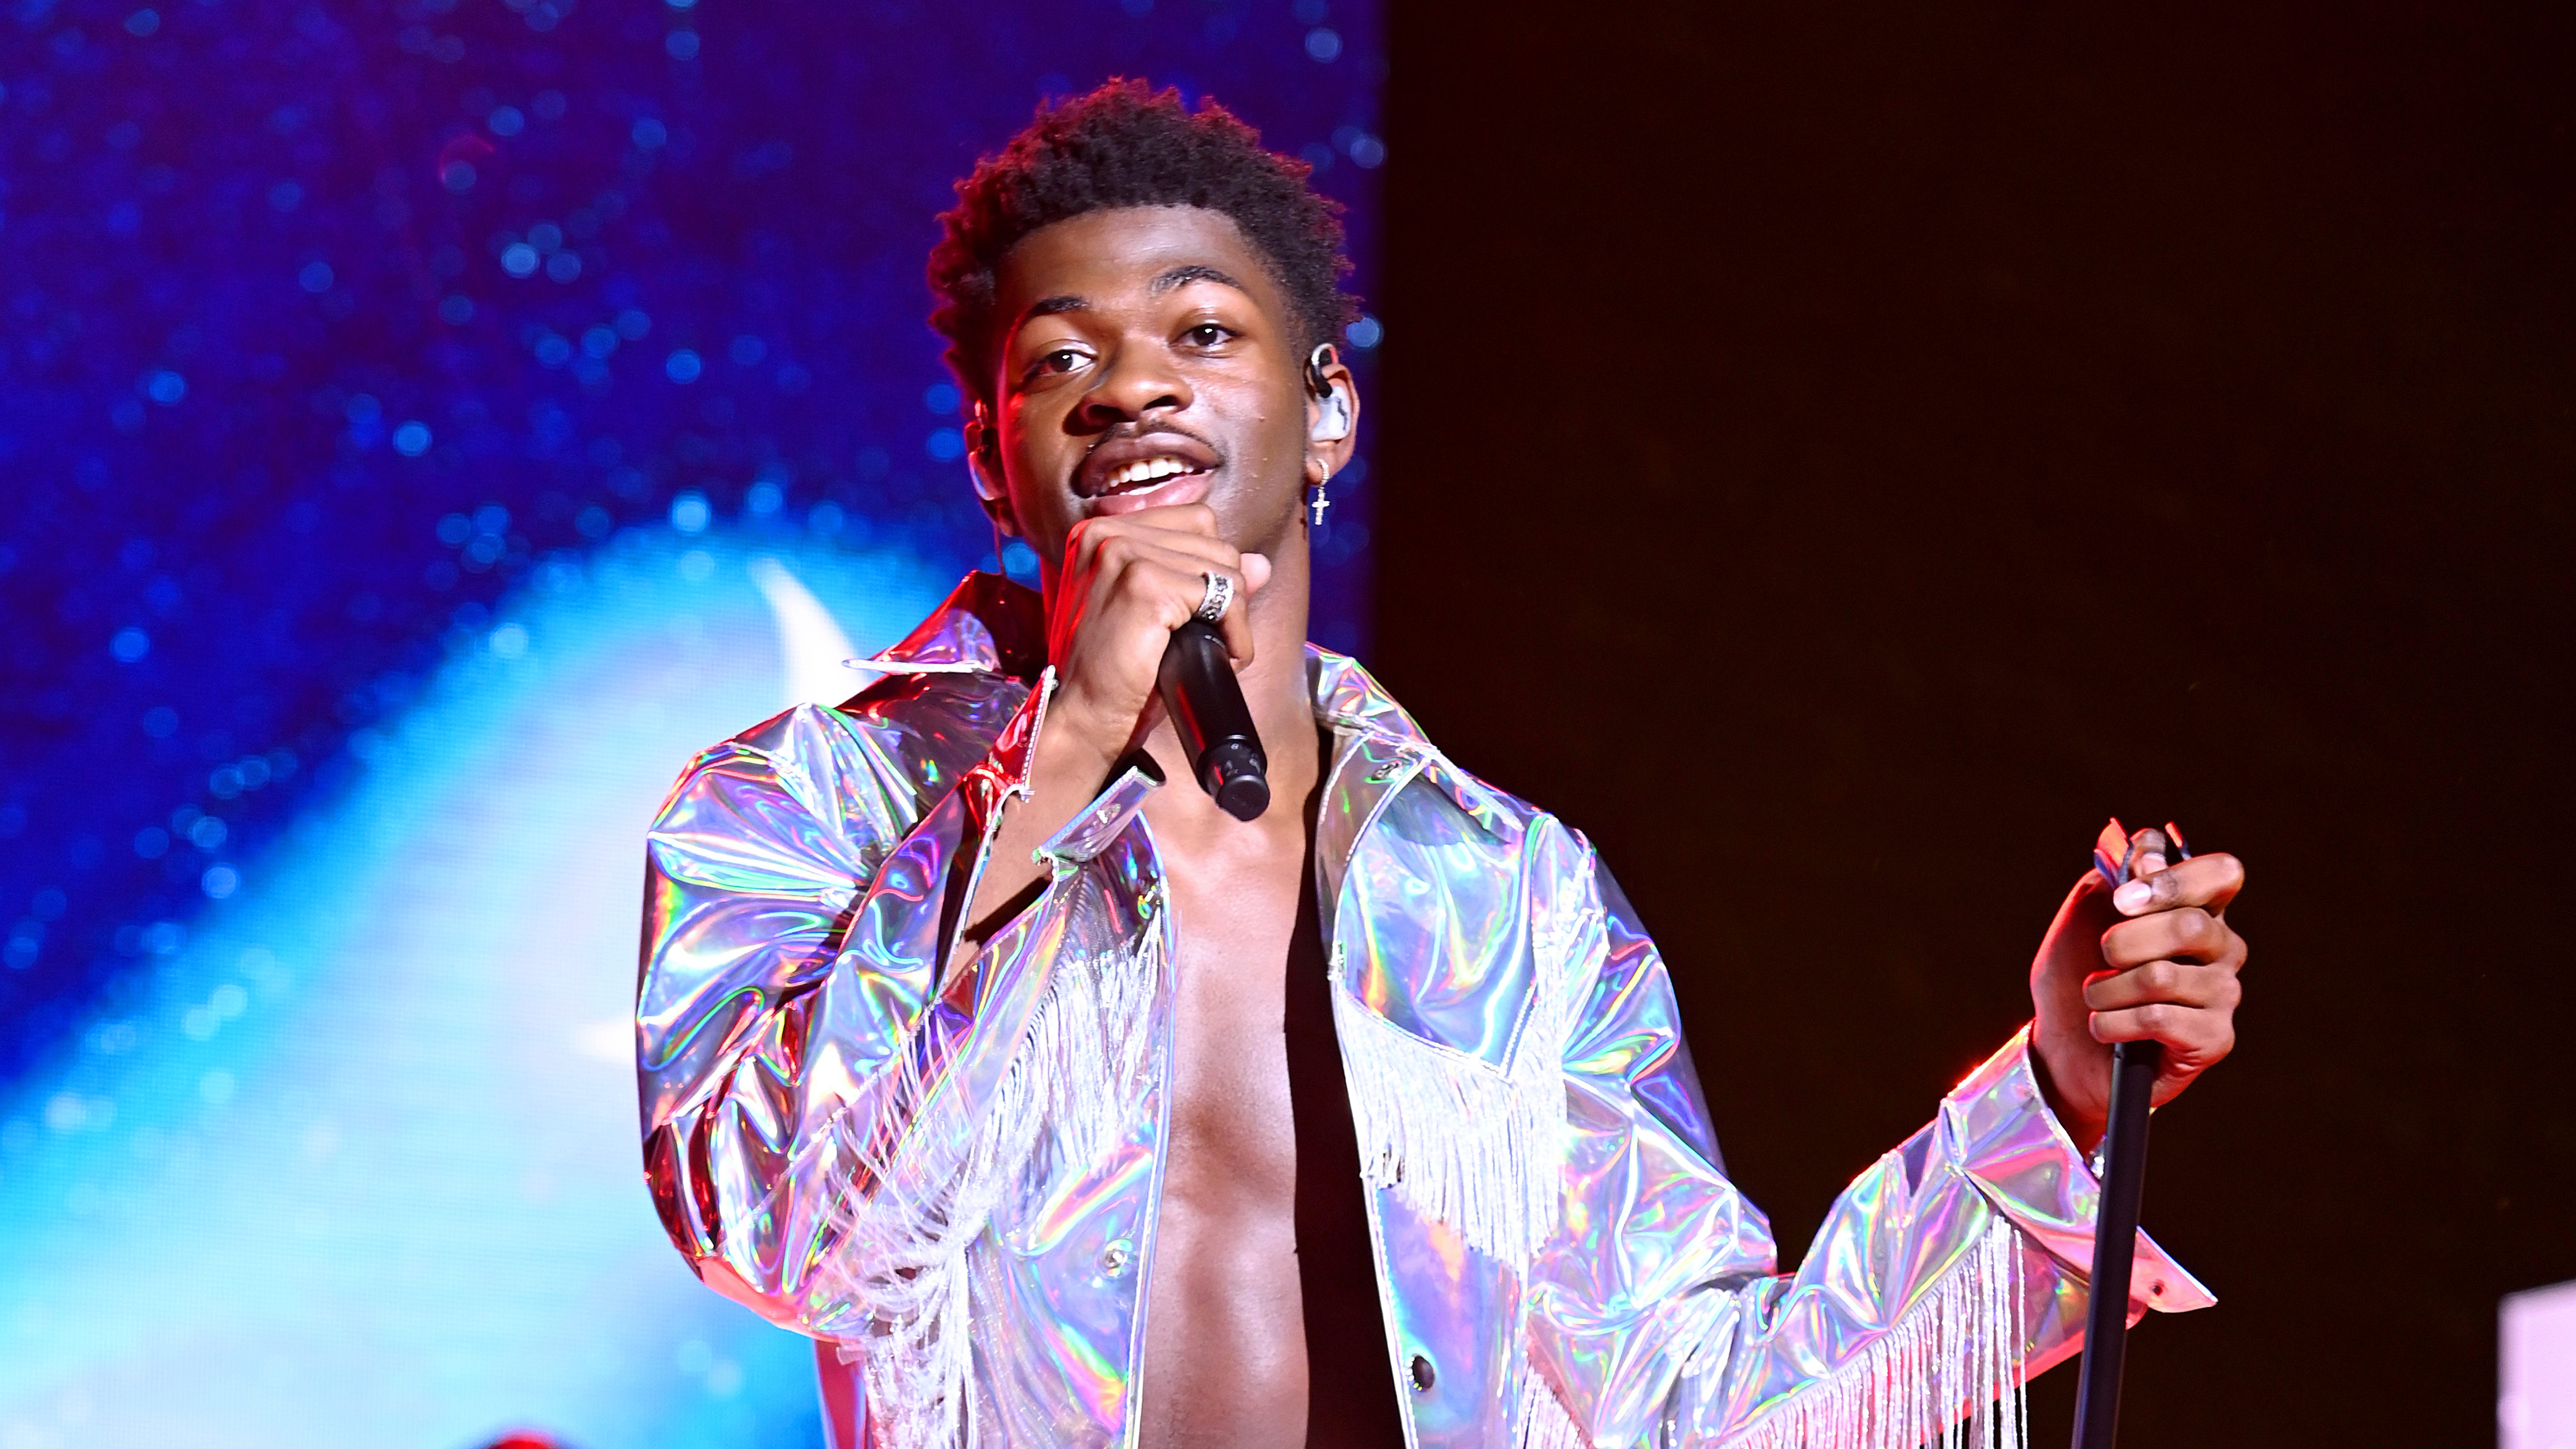 Lil Nas X's First Beauty Campaign Is Finally Here - Fashionista